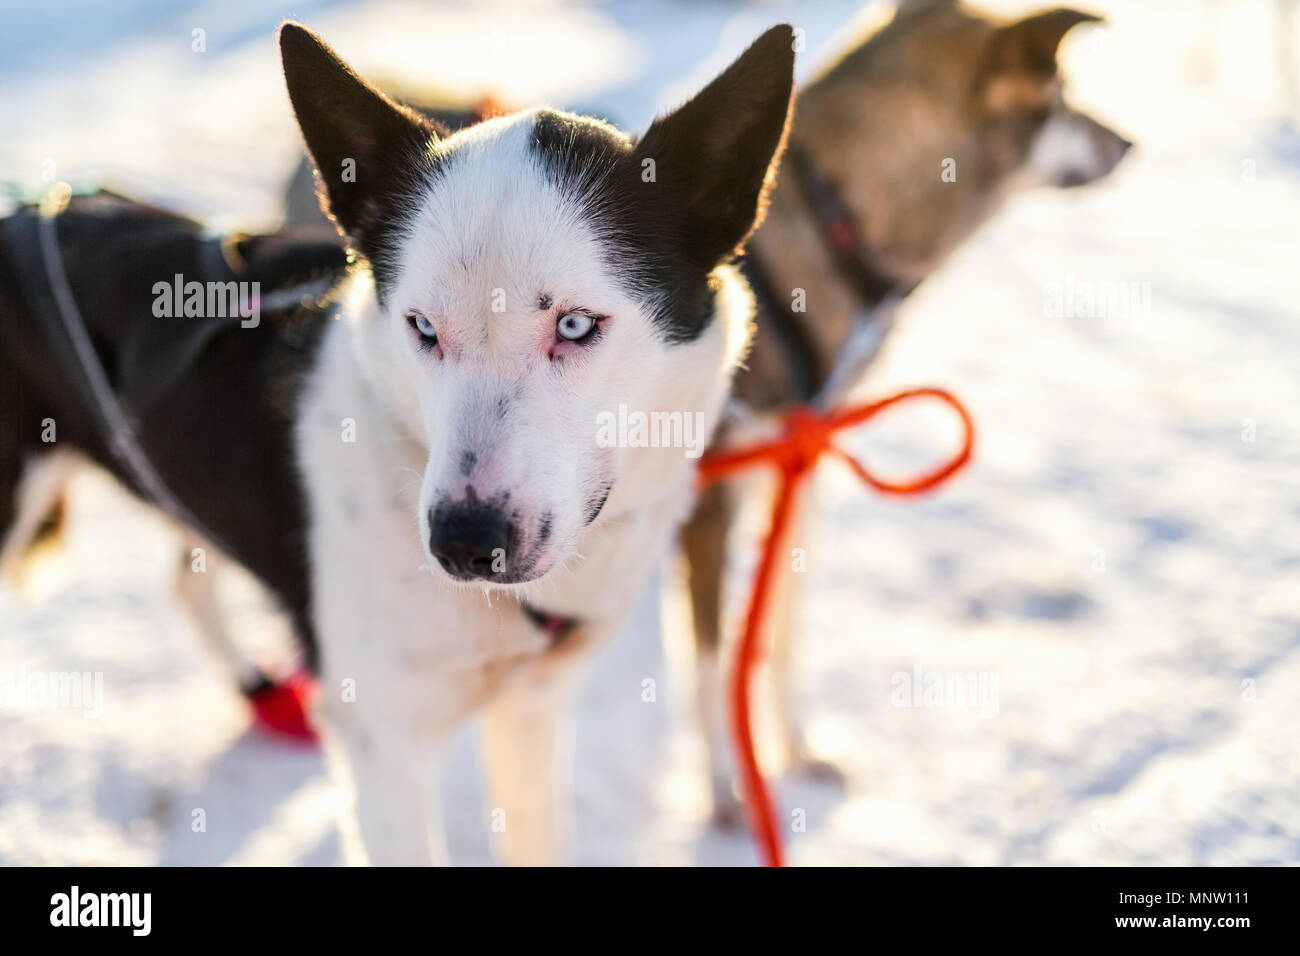 Husky kennel visit in Northern Norway Stock Photo: 185561069 - Alamy